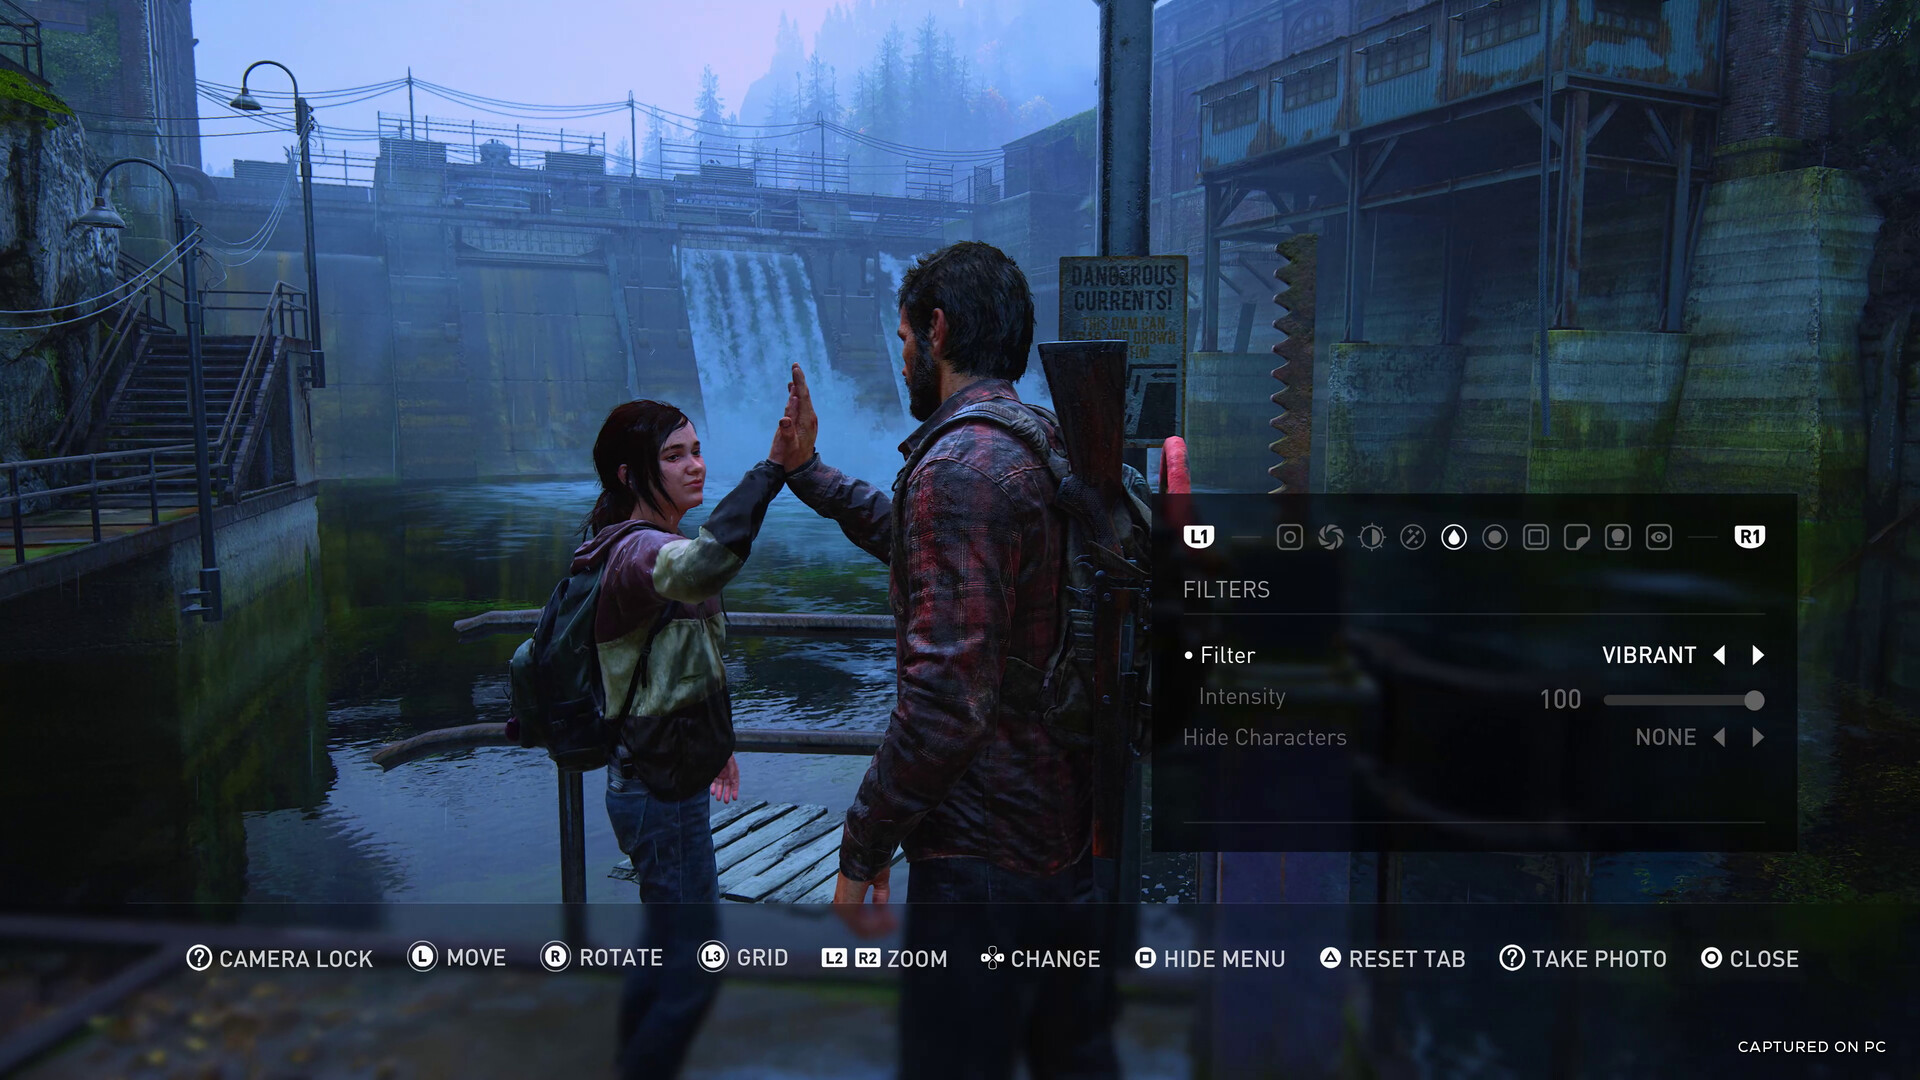 The Last of Us video game: How to play and where to buy